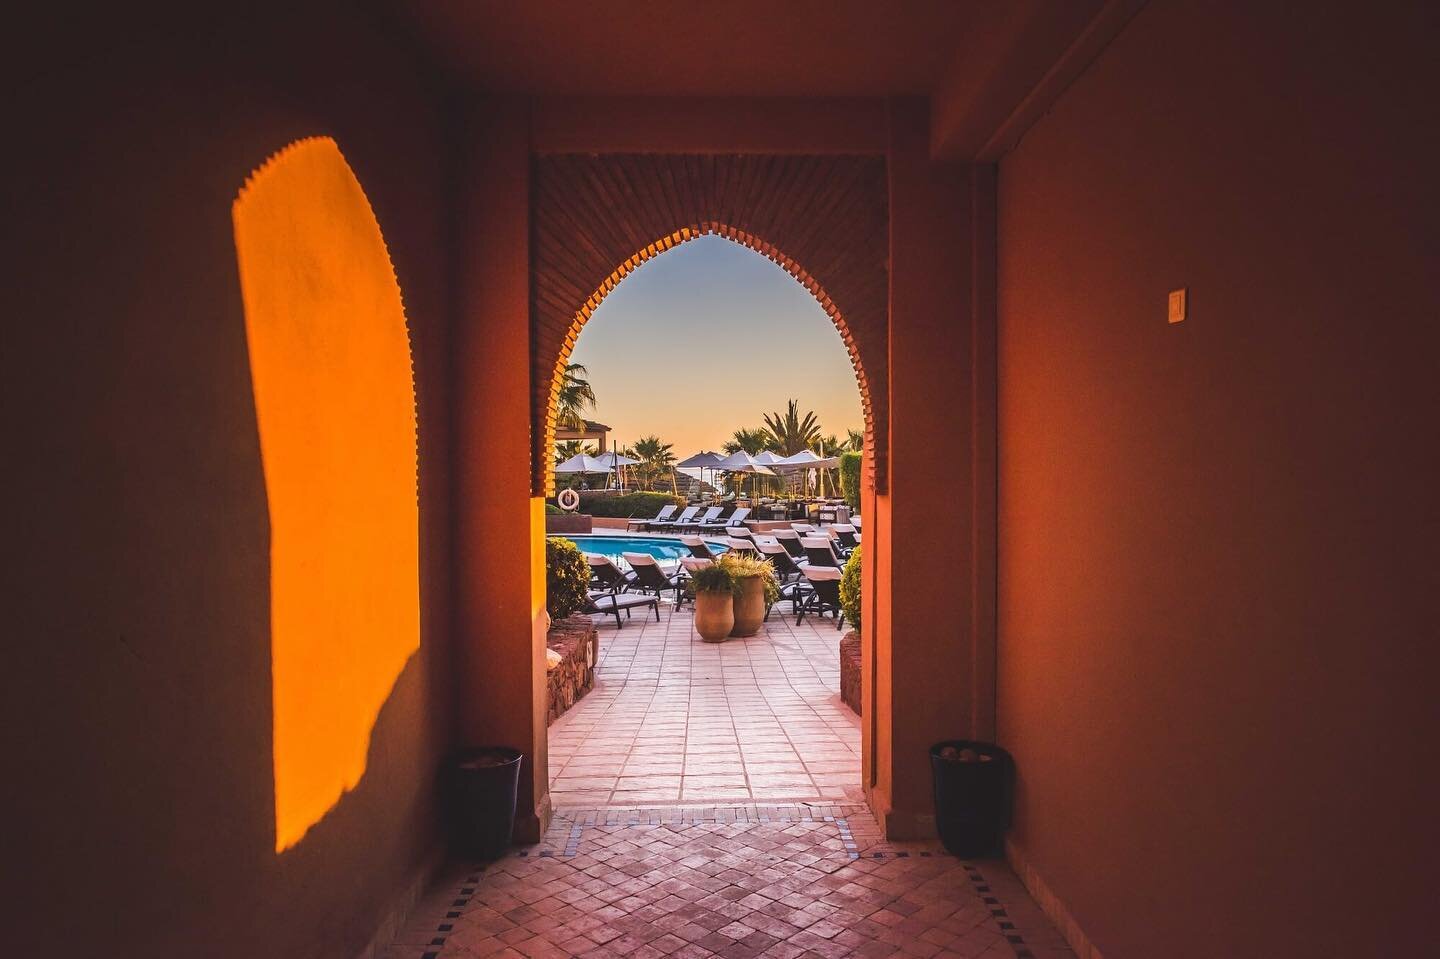 One more day to save $200 on our fall Morocco retreat! We&rsquo;re calling this one a wellness adventure retreat because we&rsquo;ll be doing so much! Included is a cooking class, surfing lesson, Marrakech guided tour, and hike in the Atlas Mountains